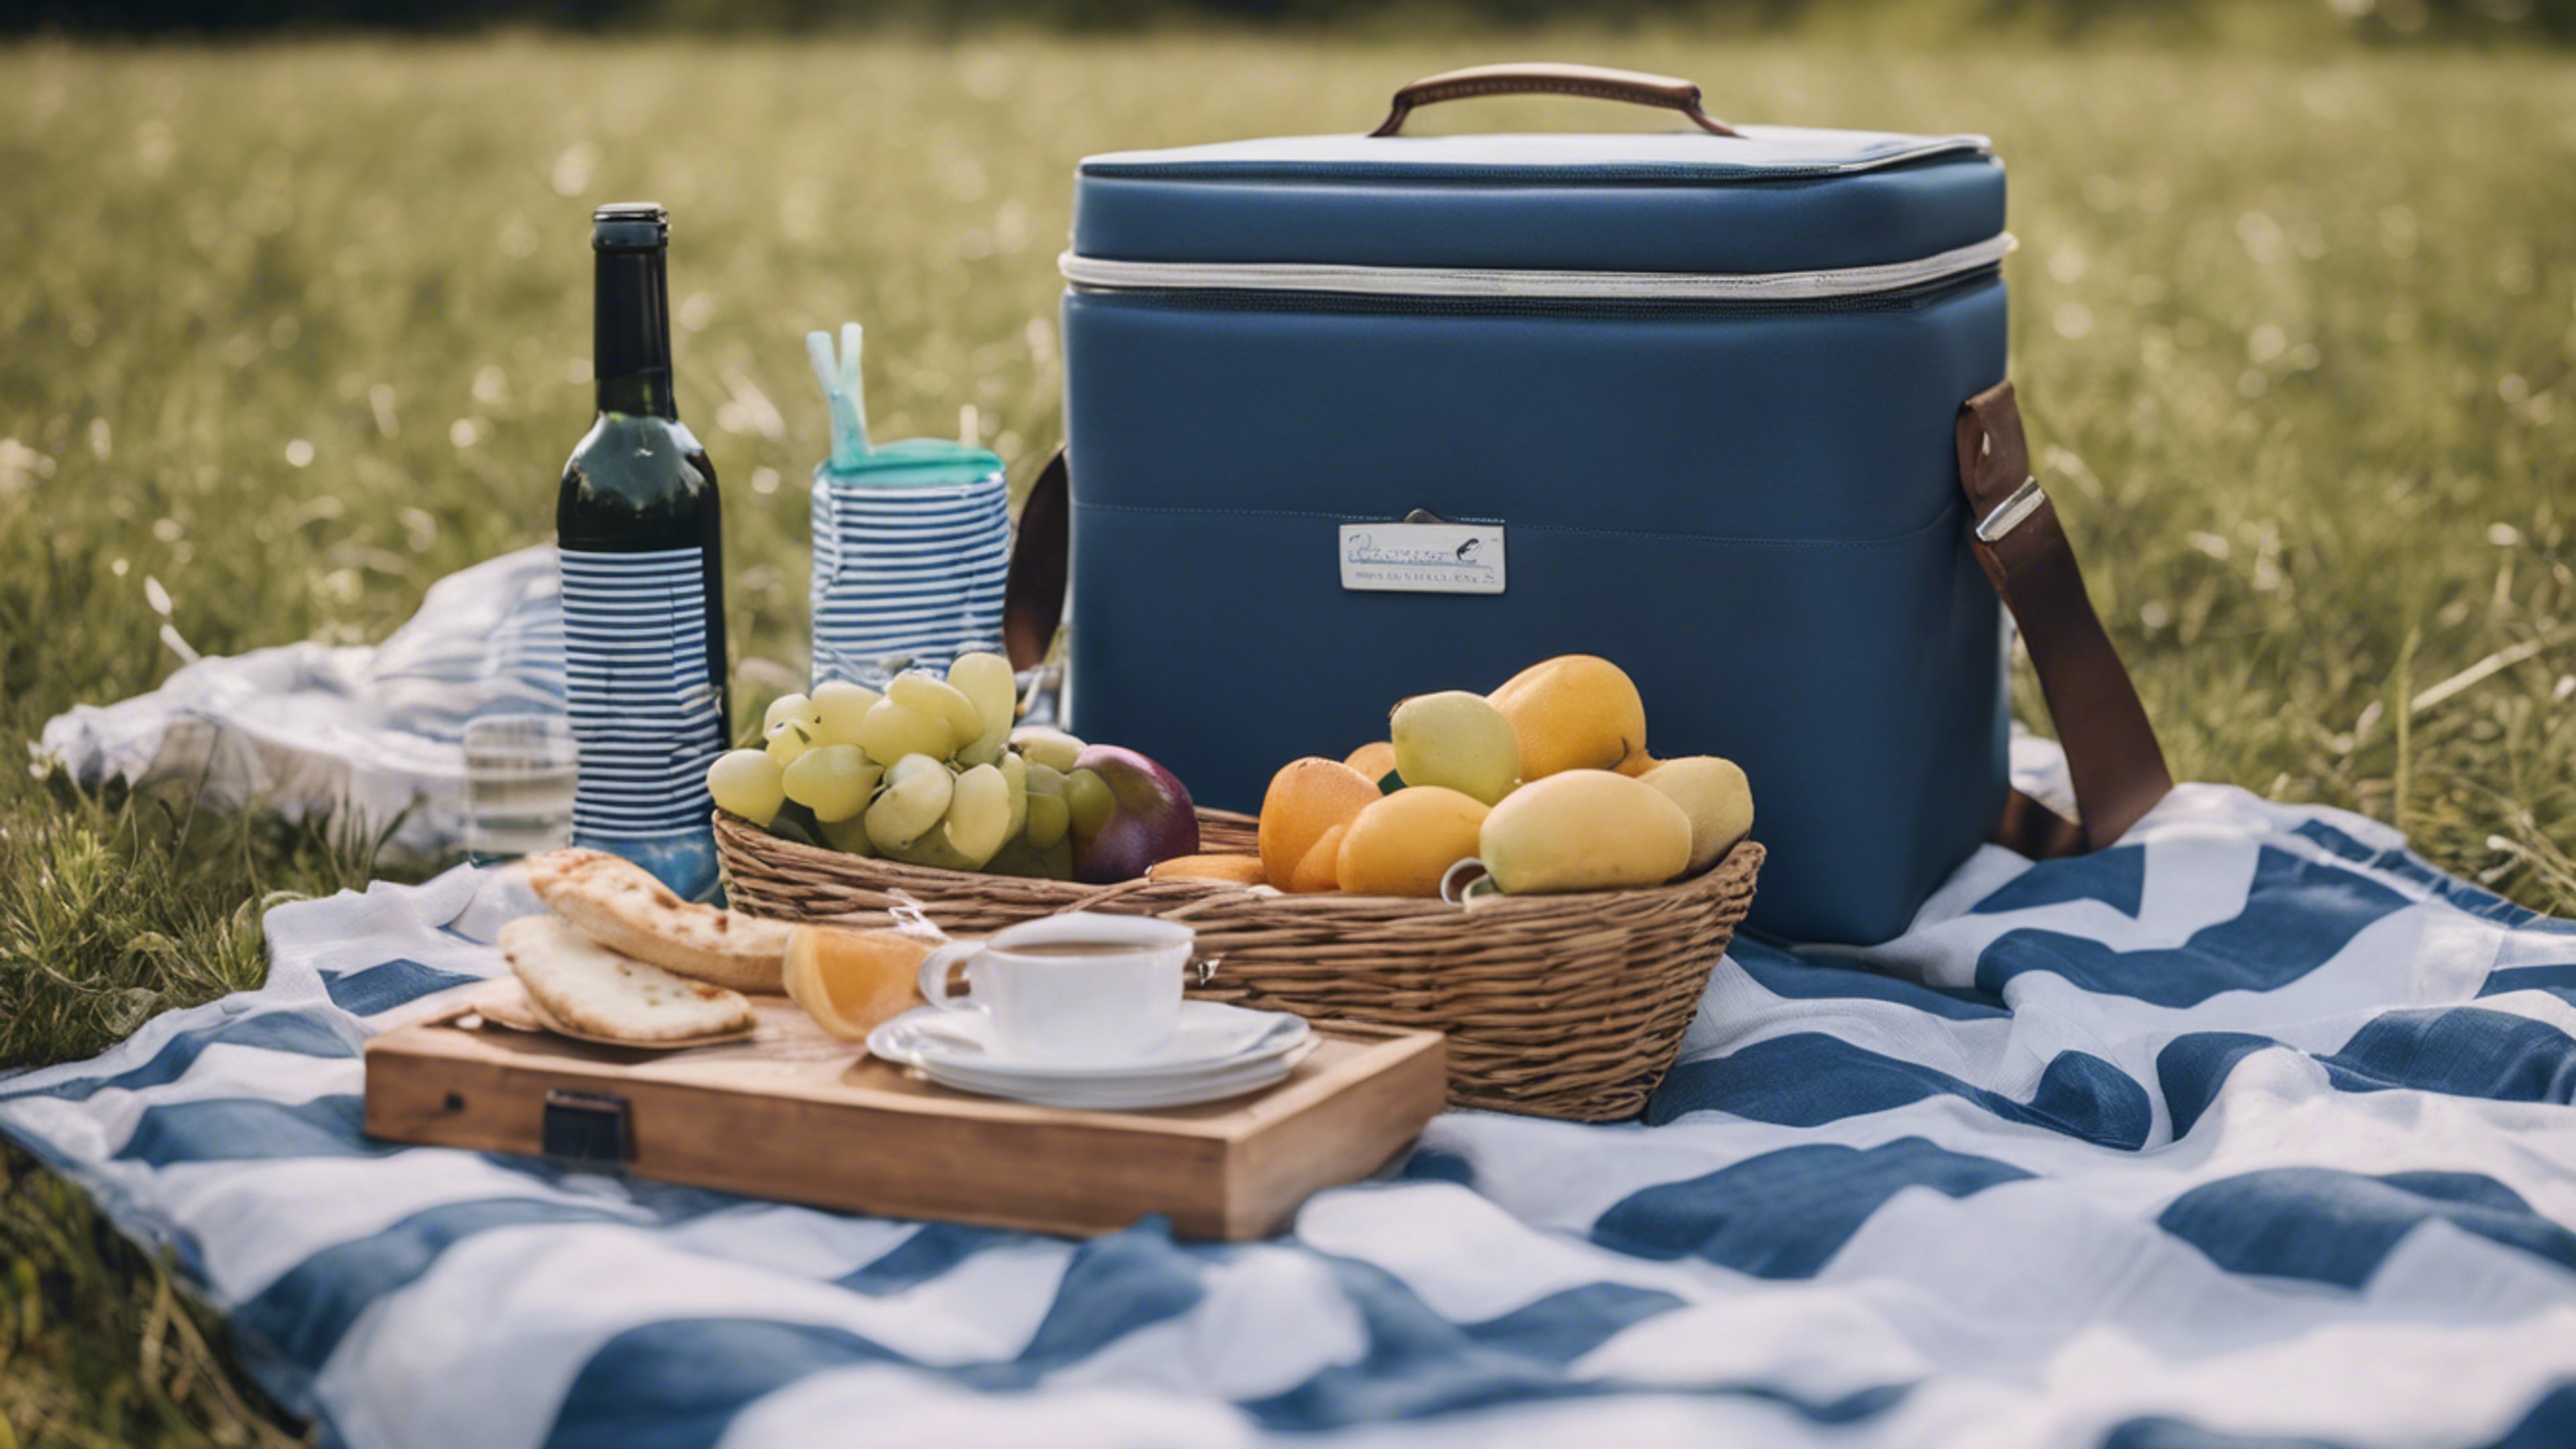 A preppy picnic setup in a grassy meadow, featuring a blue and white striped picnic blanket and matching cooler. 벽지[2c3aa7a20c924d6f9450]